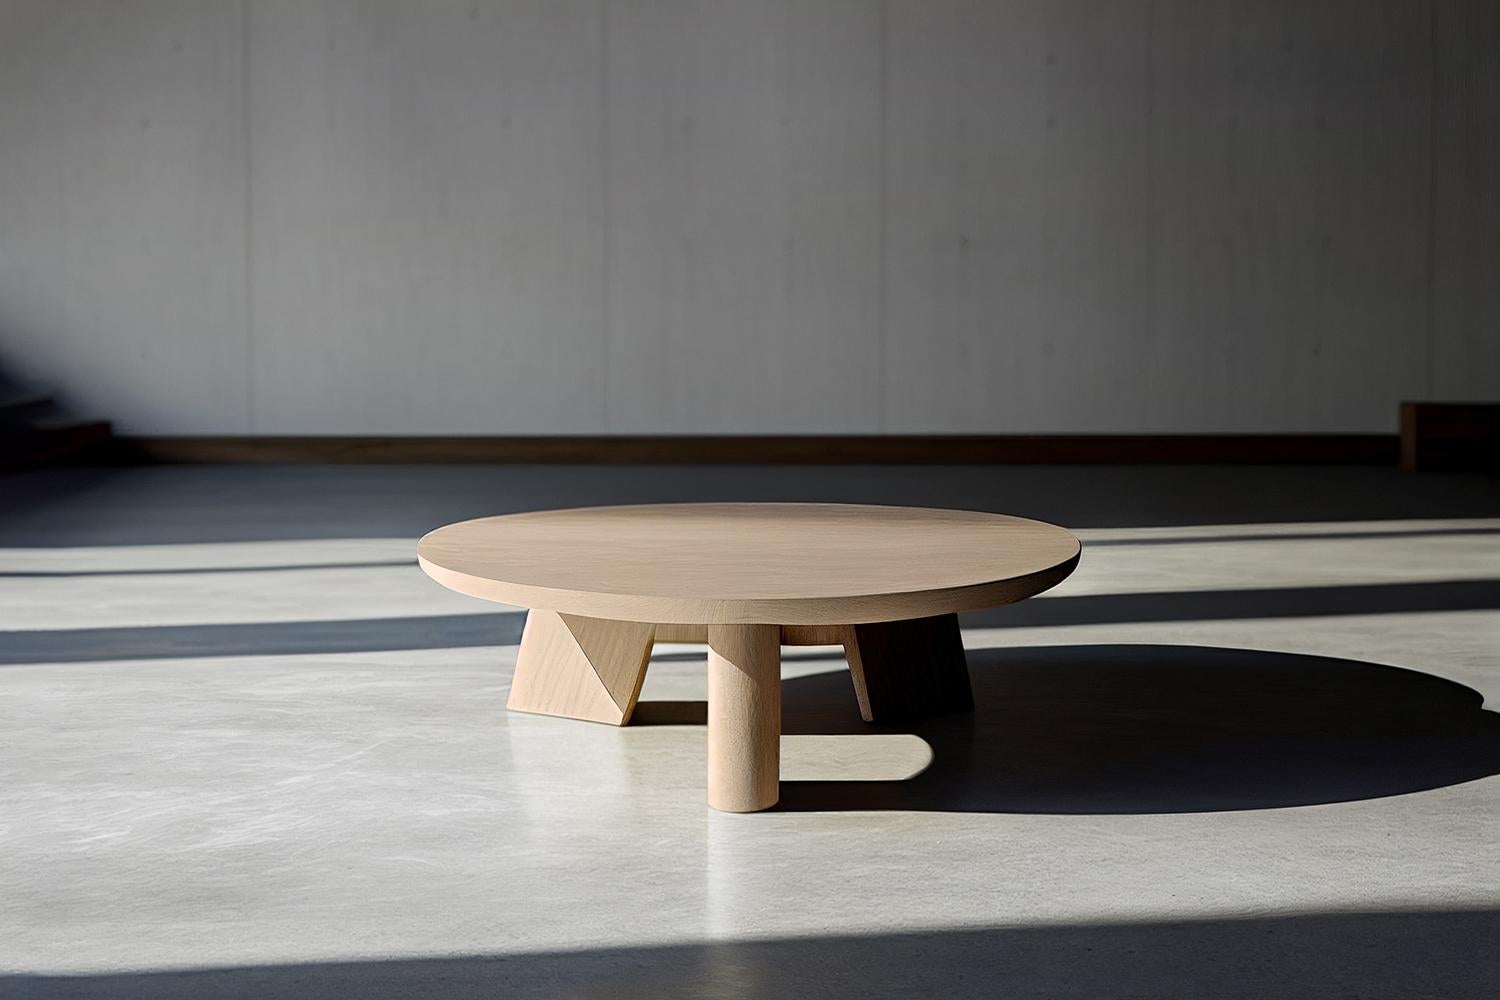 Round coffee table with 4 legs made of solid thick oak.
Product made to order; some variances may apply to the final piece.

——

NONO is a Mexican design brand with more than 10 years of experience dedicated to the production of interior